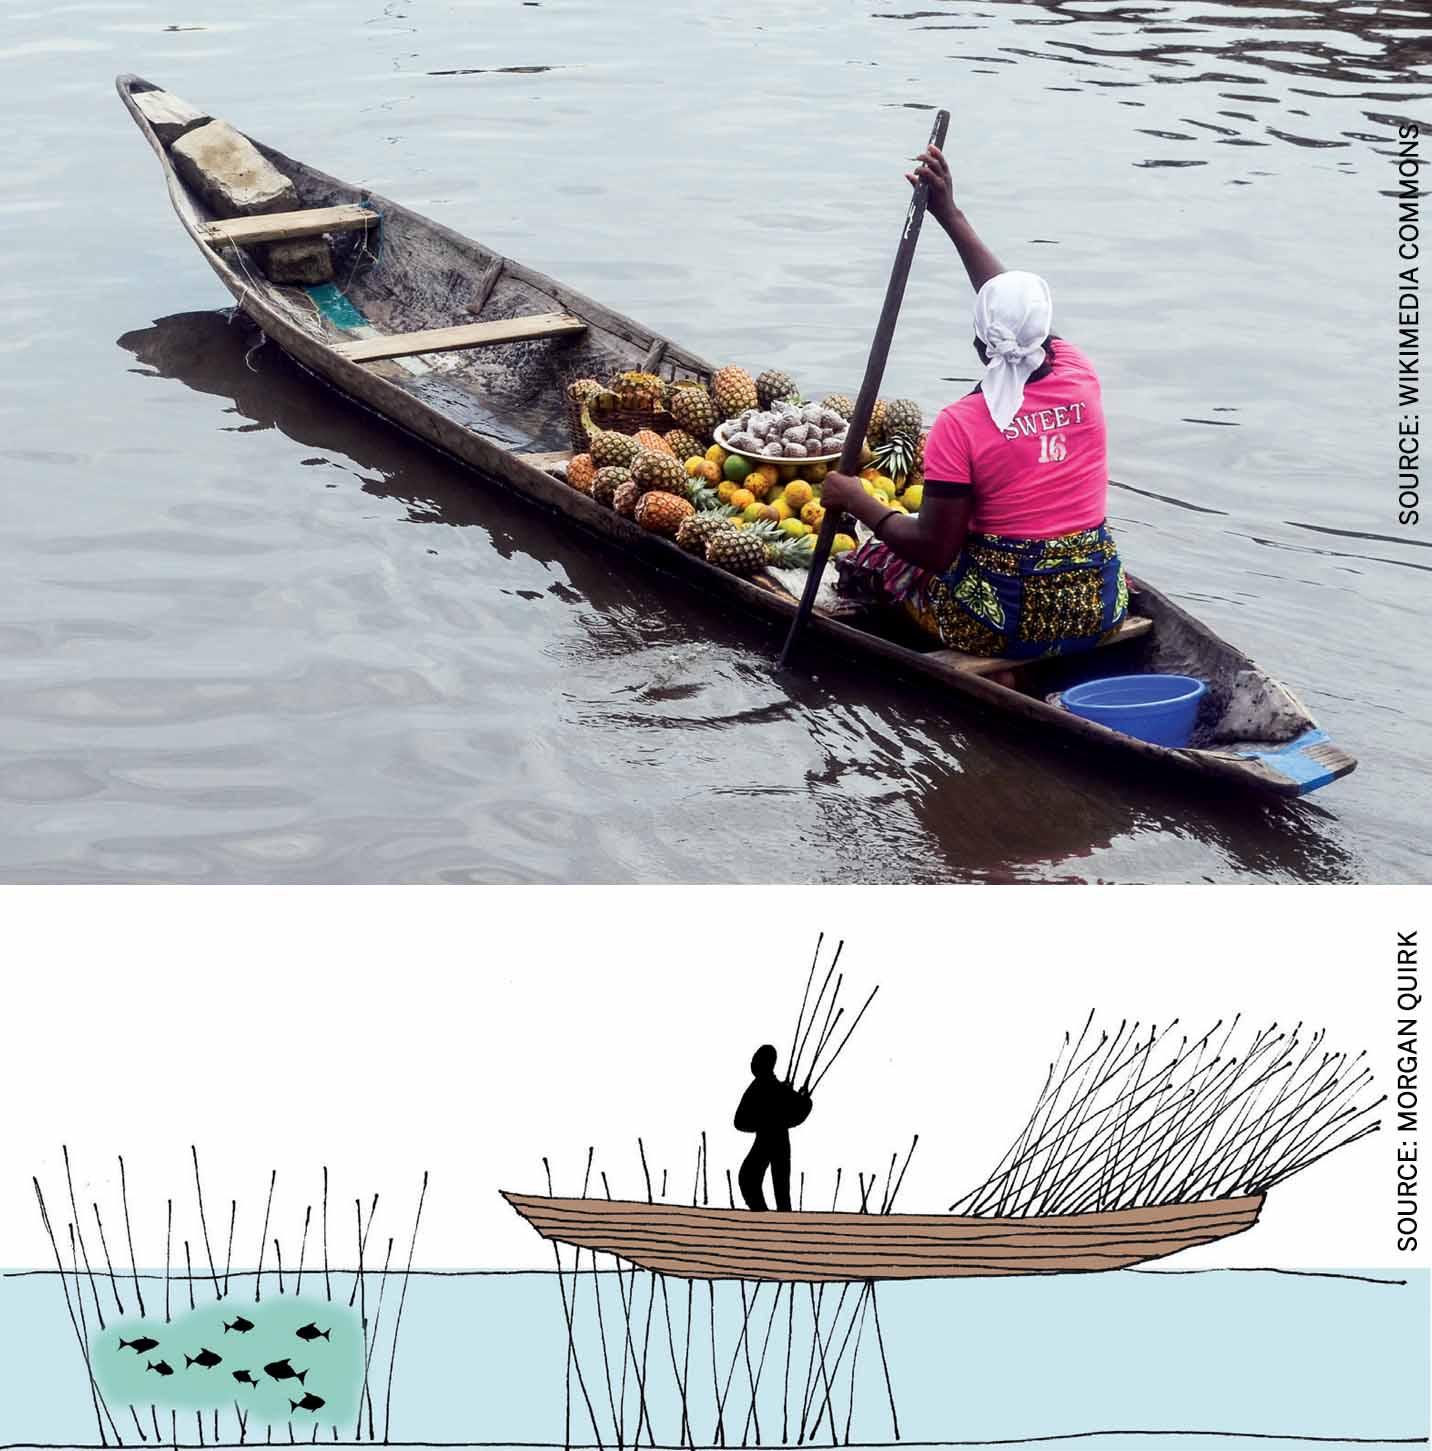 ganvi-between-resilience-and-conservation-tofinu-women-often-sell-fish-other-goods-out-their-pirogues-sectional-diagram-acadja-enclosure